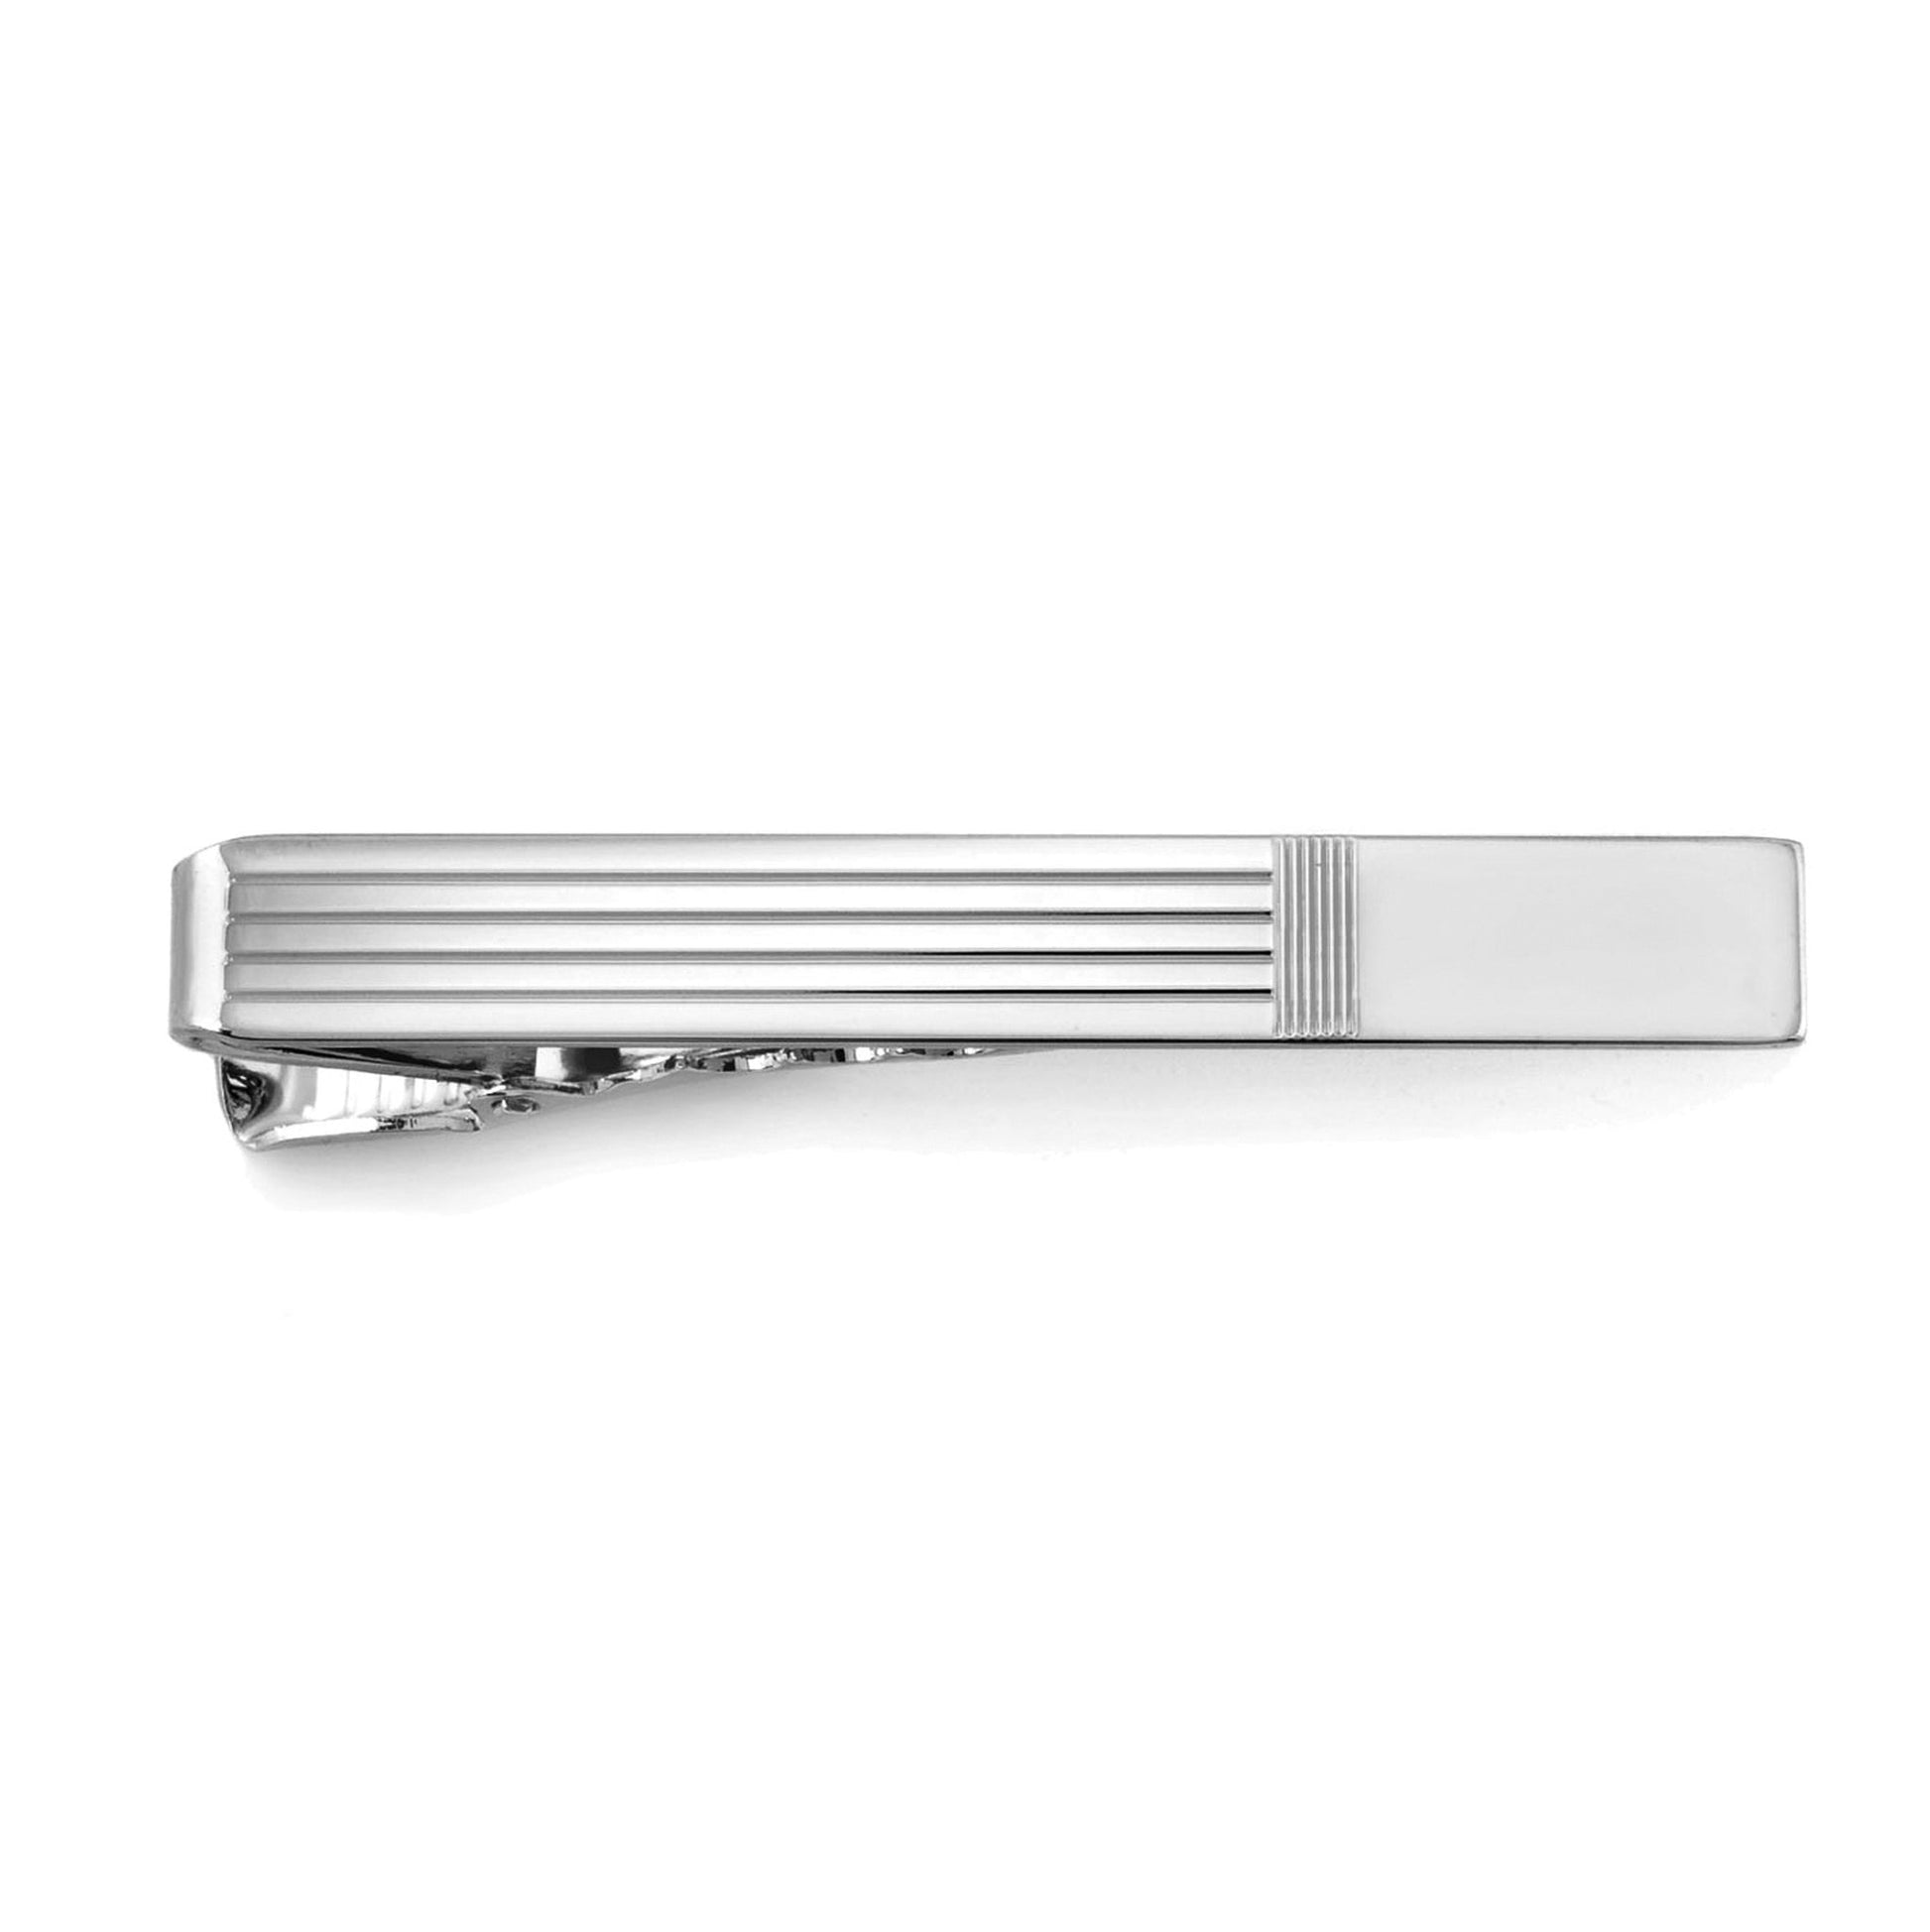 A sterling silver 2 color tie bar displayed on a neutral white background.